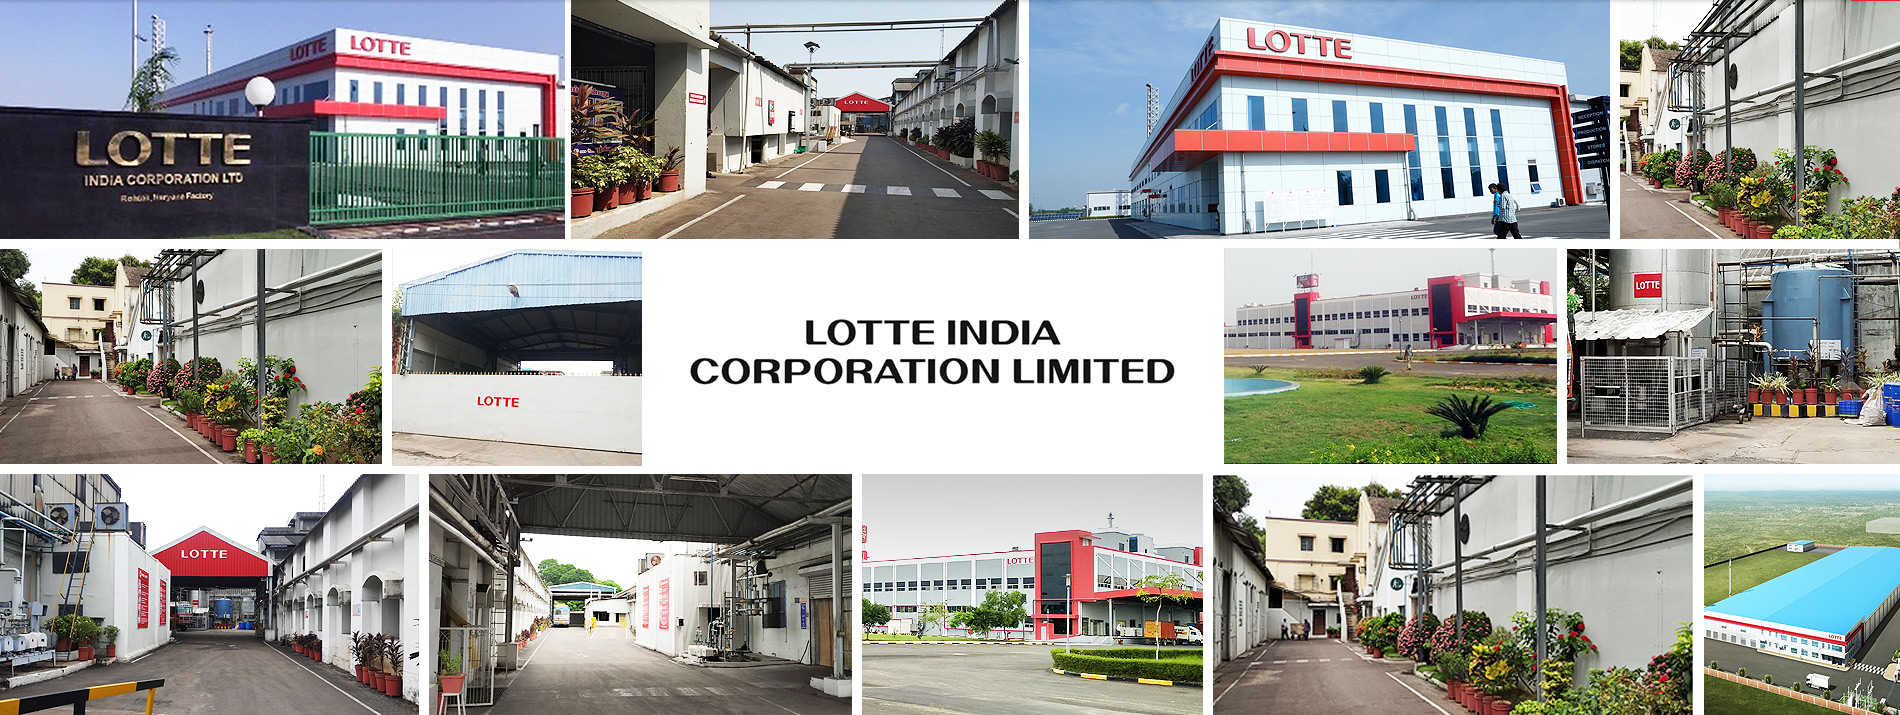 Lotte India Corporation Limited